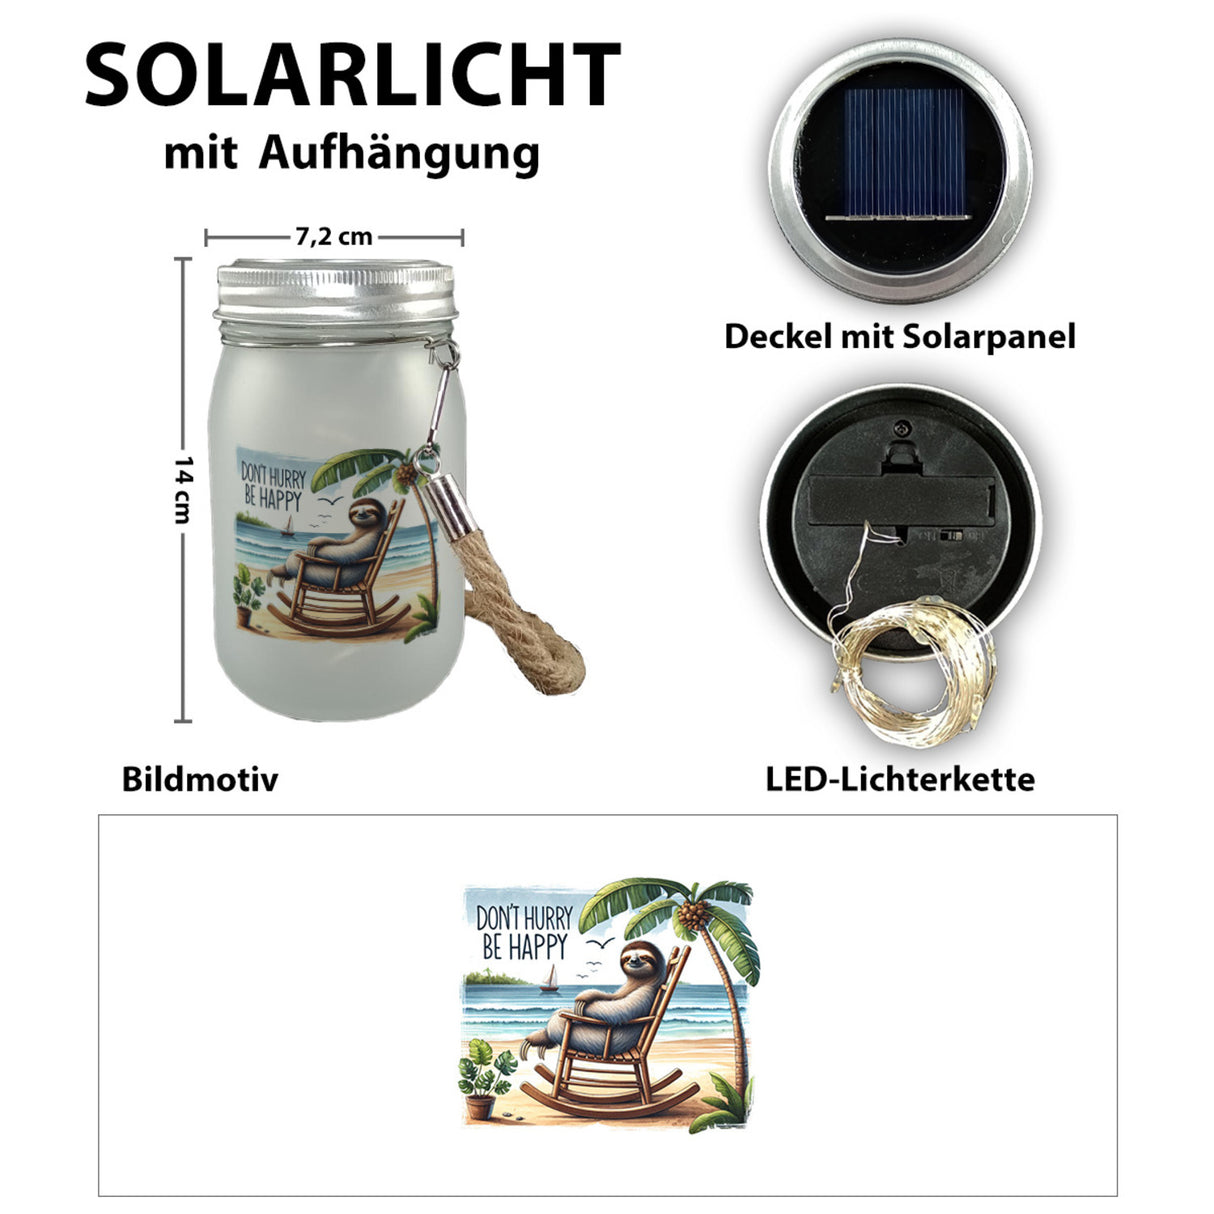 Faultier am Strand Solarlicht mit Spruch Don't hurry - be happy